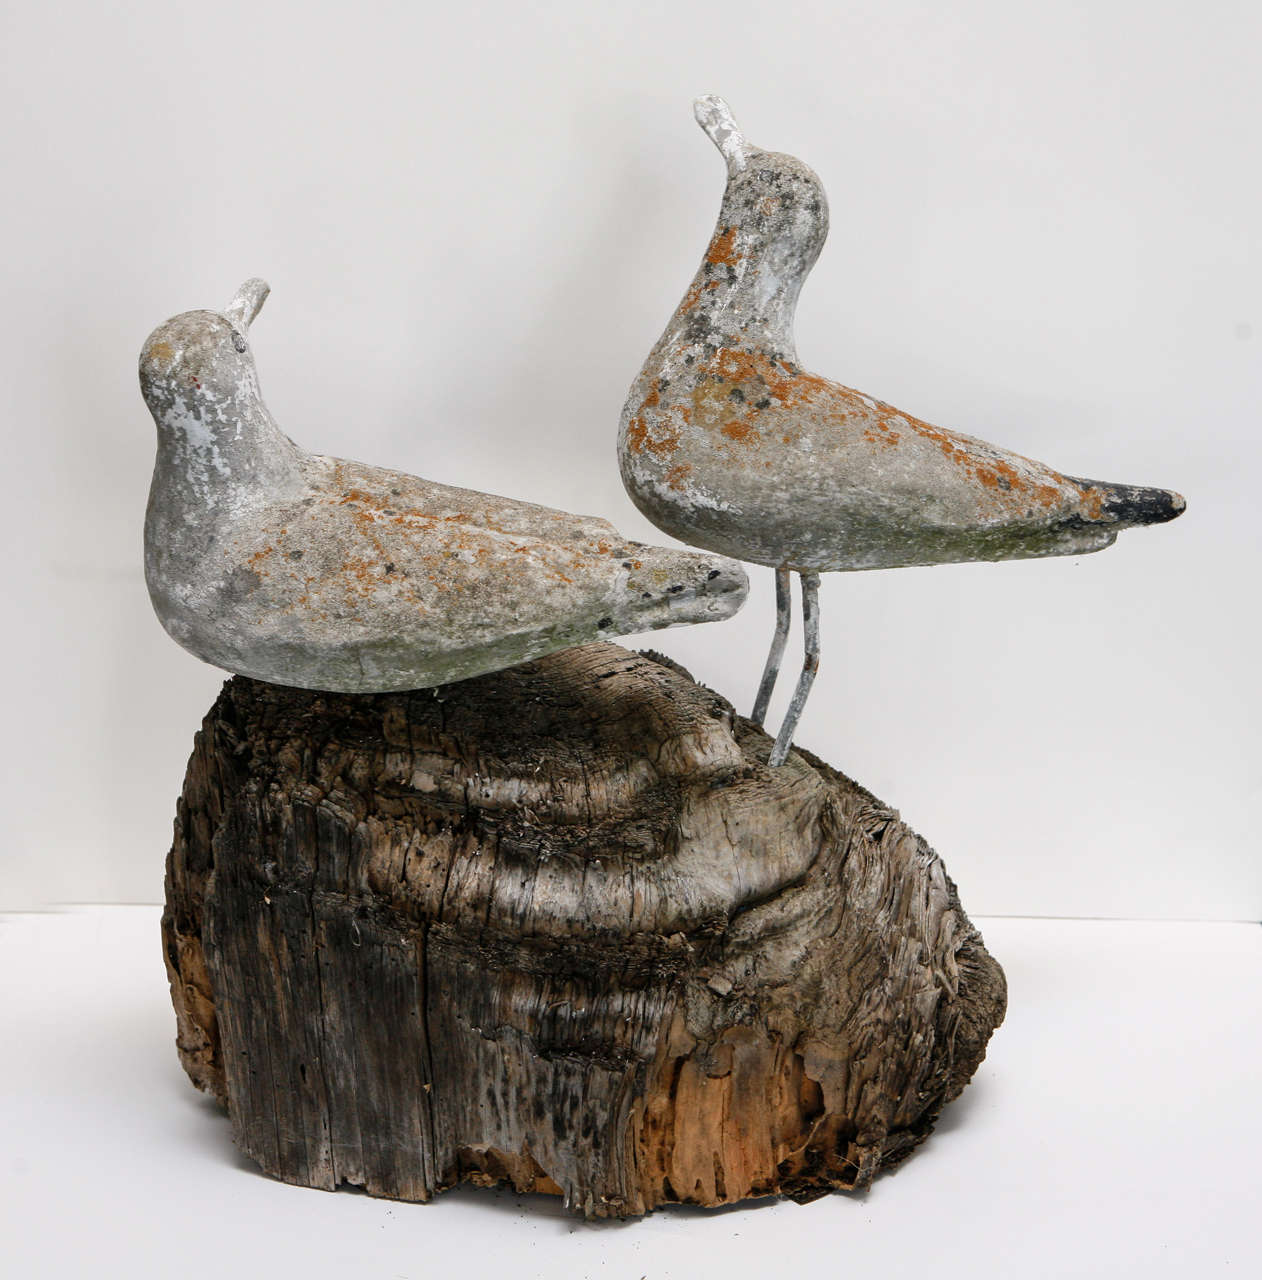 Charming sculpture of seagulls on a piece of driftwood.